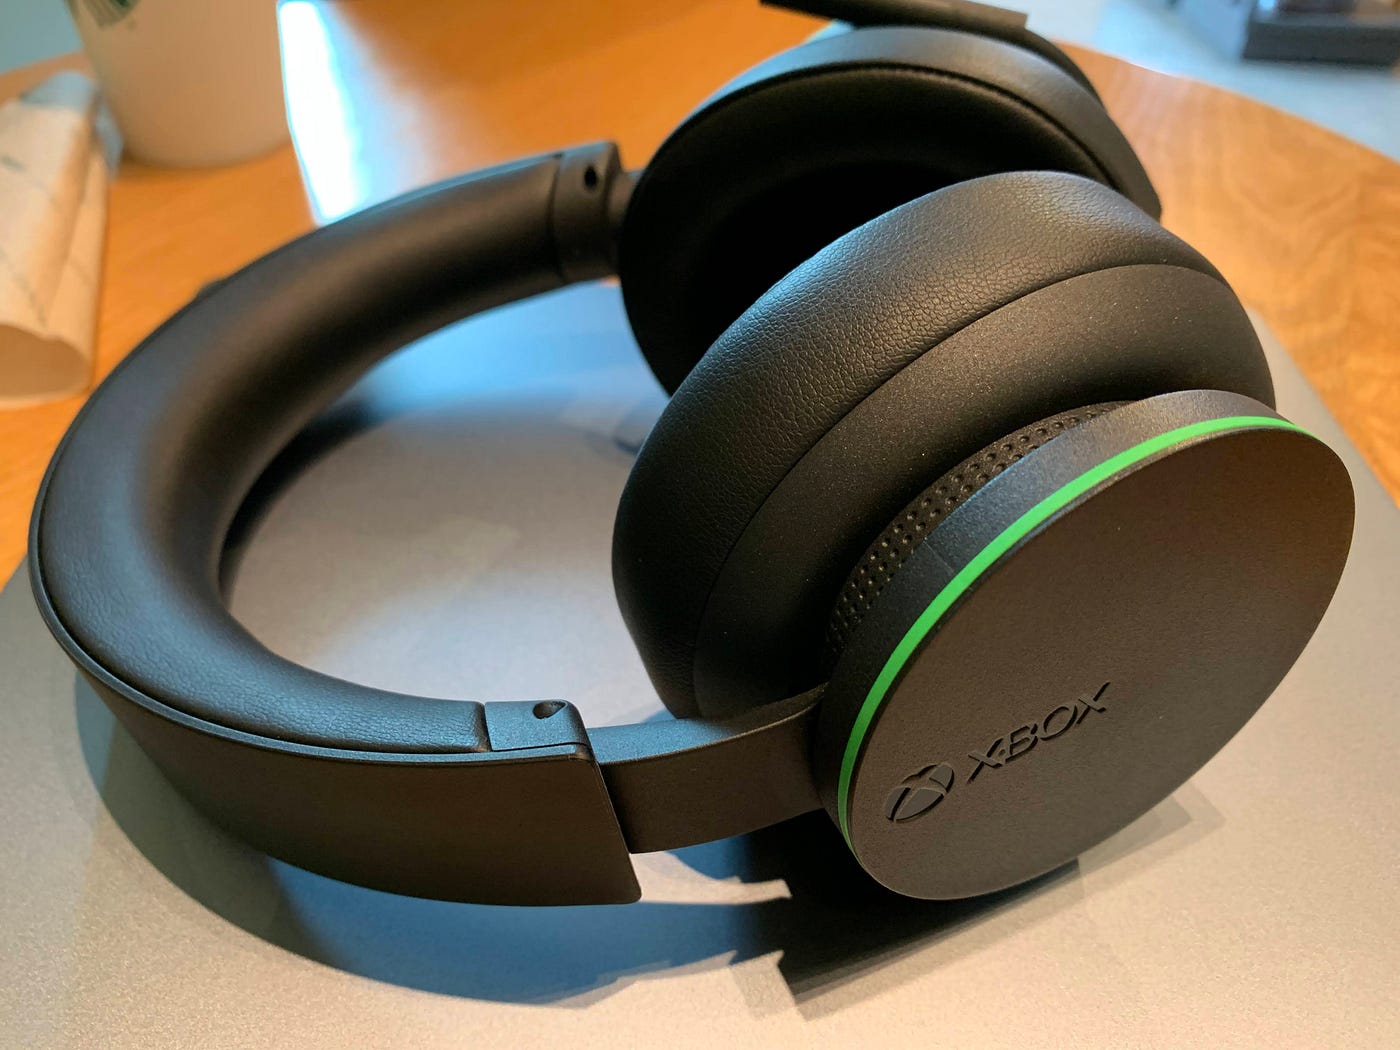 The Worst Modern Gaming Headset. Microsoft dropped the ball right at the… |  by Alex Rowe | Medium